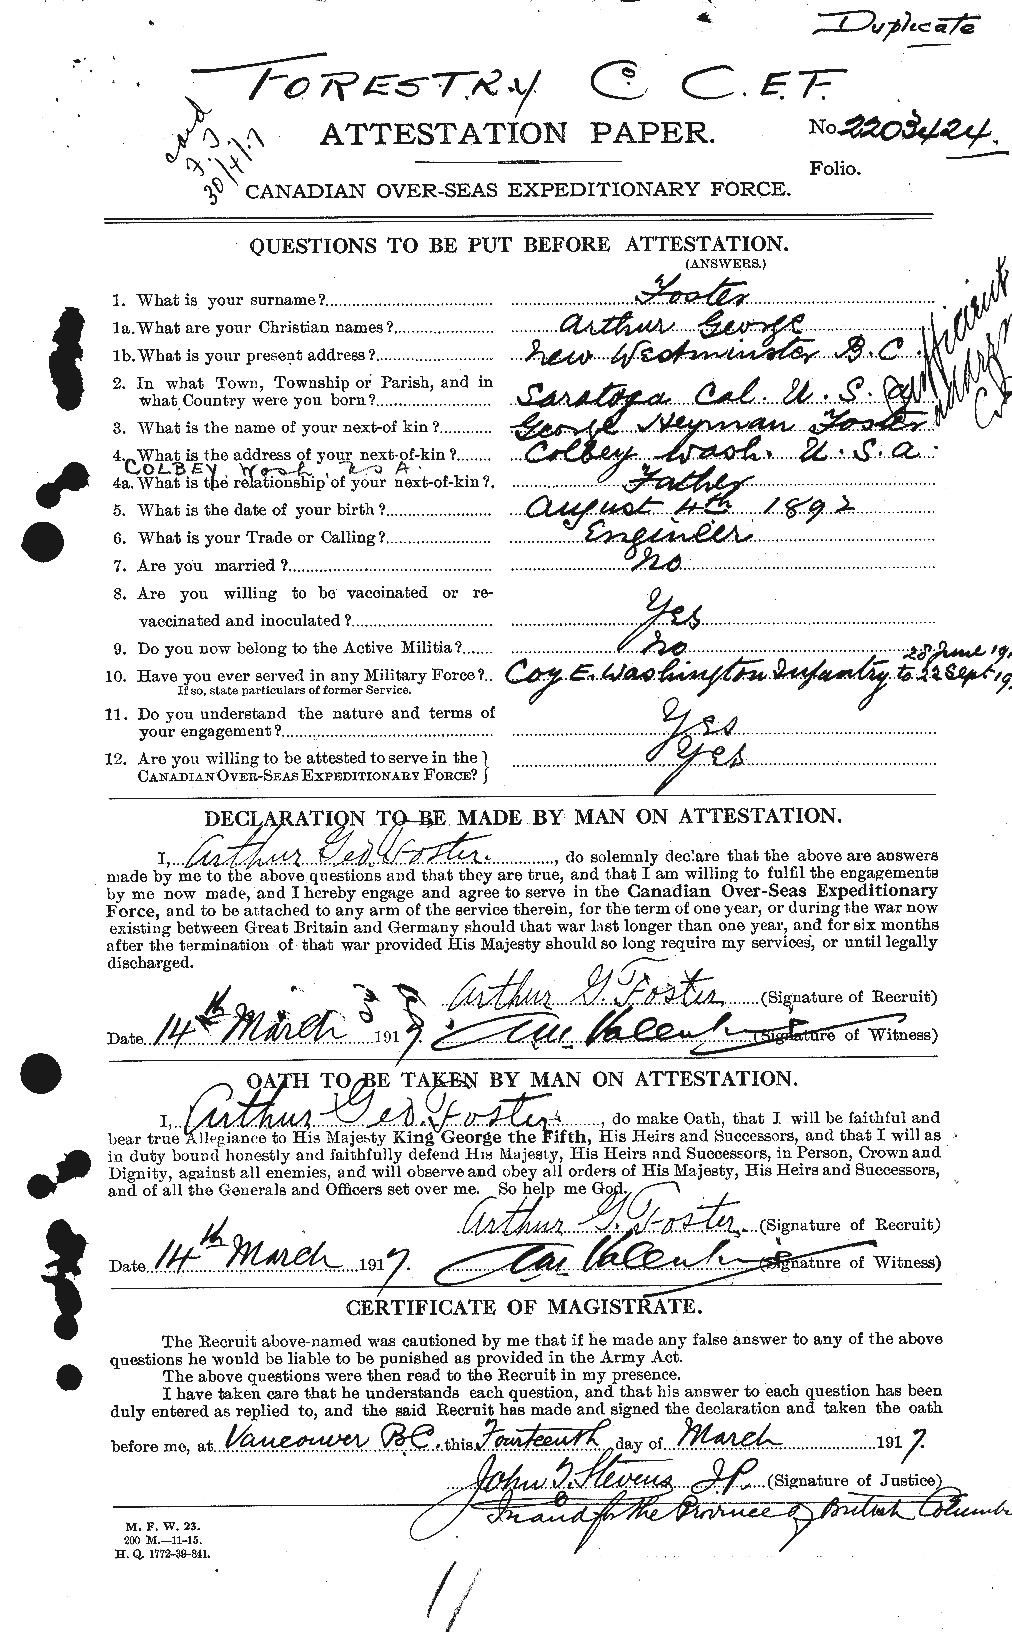 Personnel Records of the First World War - CEF 330472a